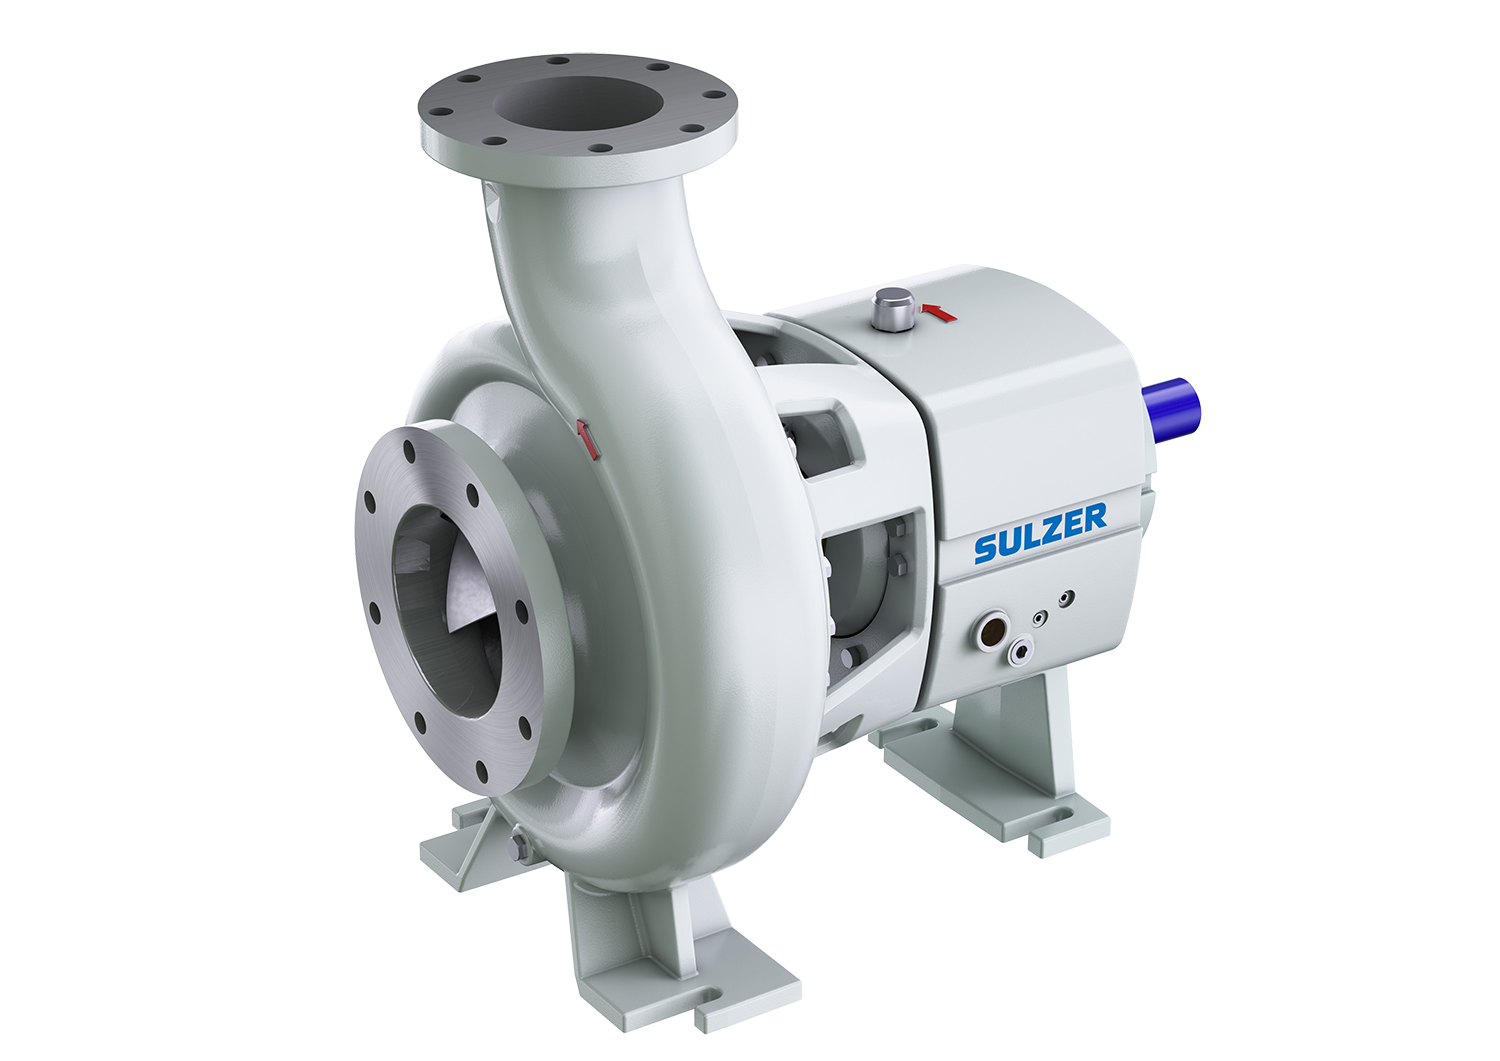 Sulzer's CPE range now conforms to the highest standards related to drinking water applications.